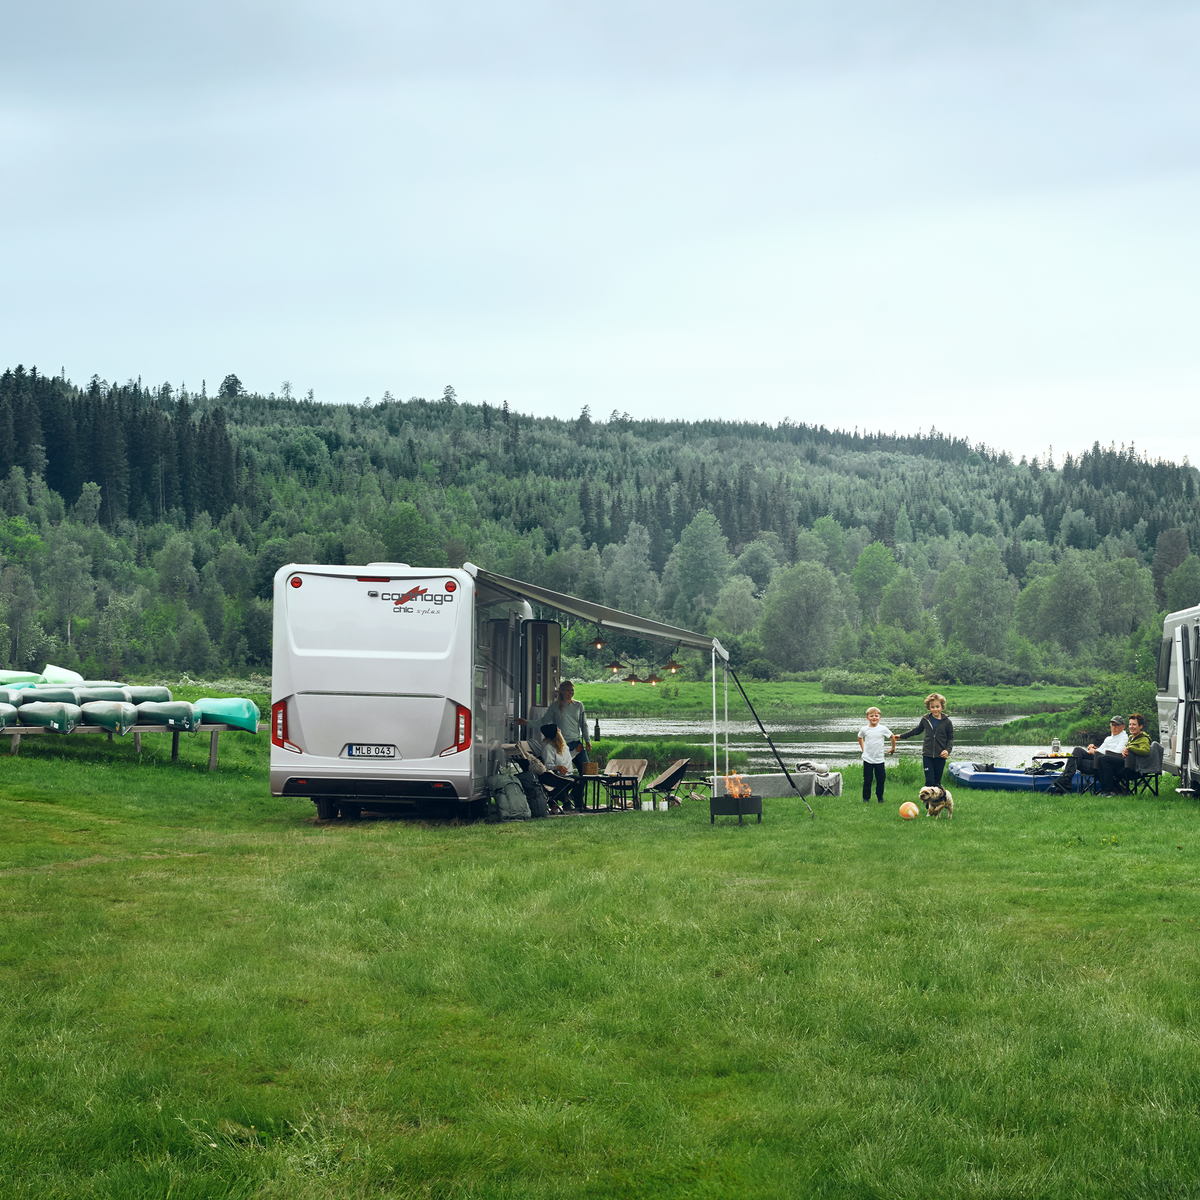 A line of motorhomes parked in the countryside with Thule Omnistor 9200 RV awnings.